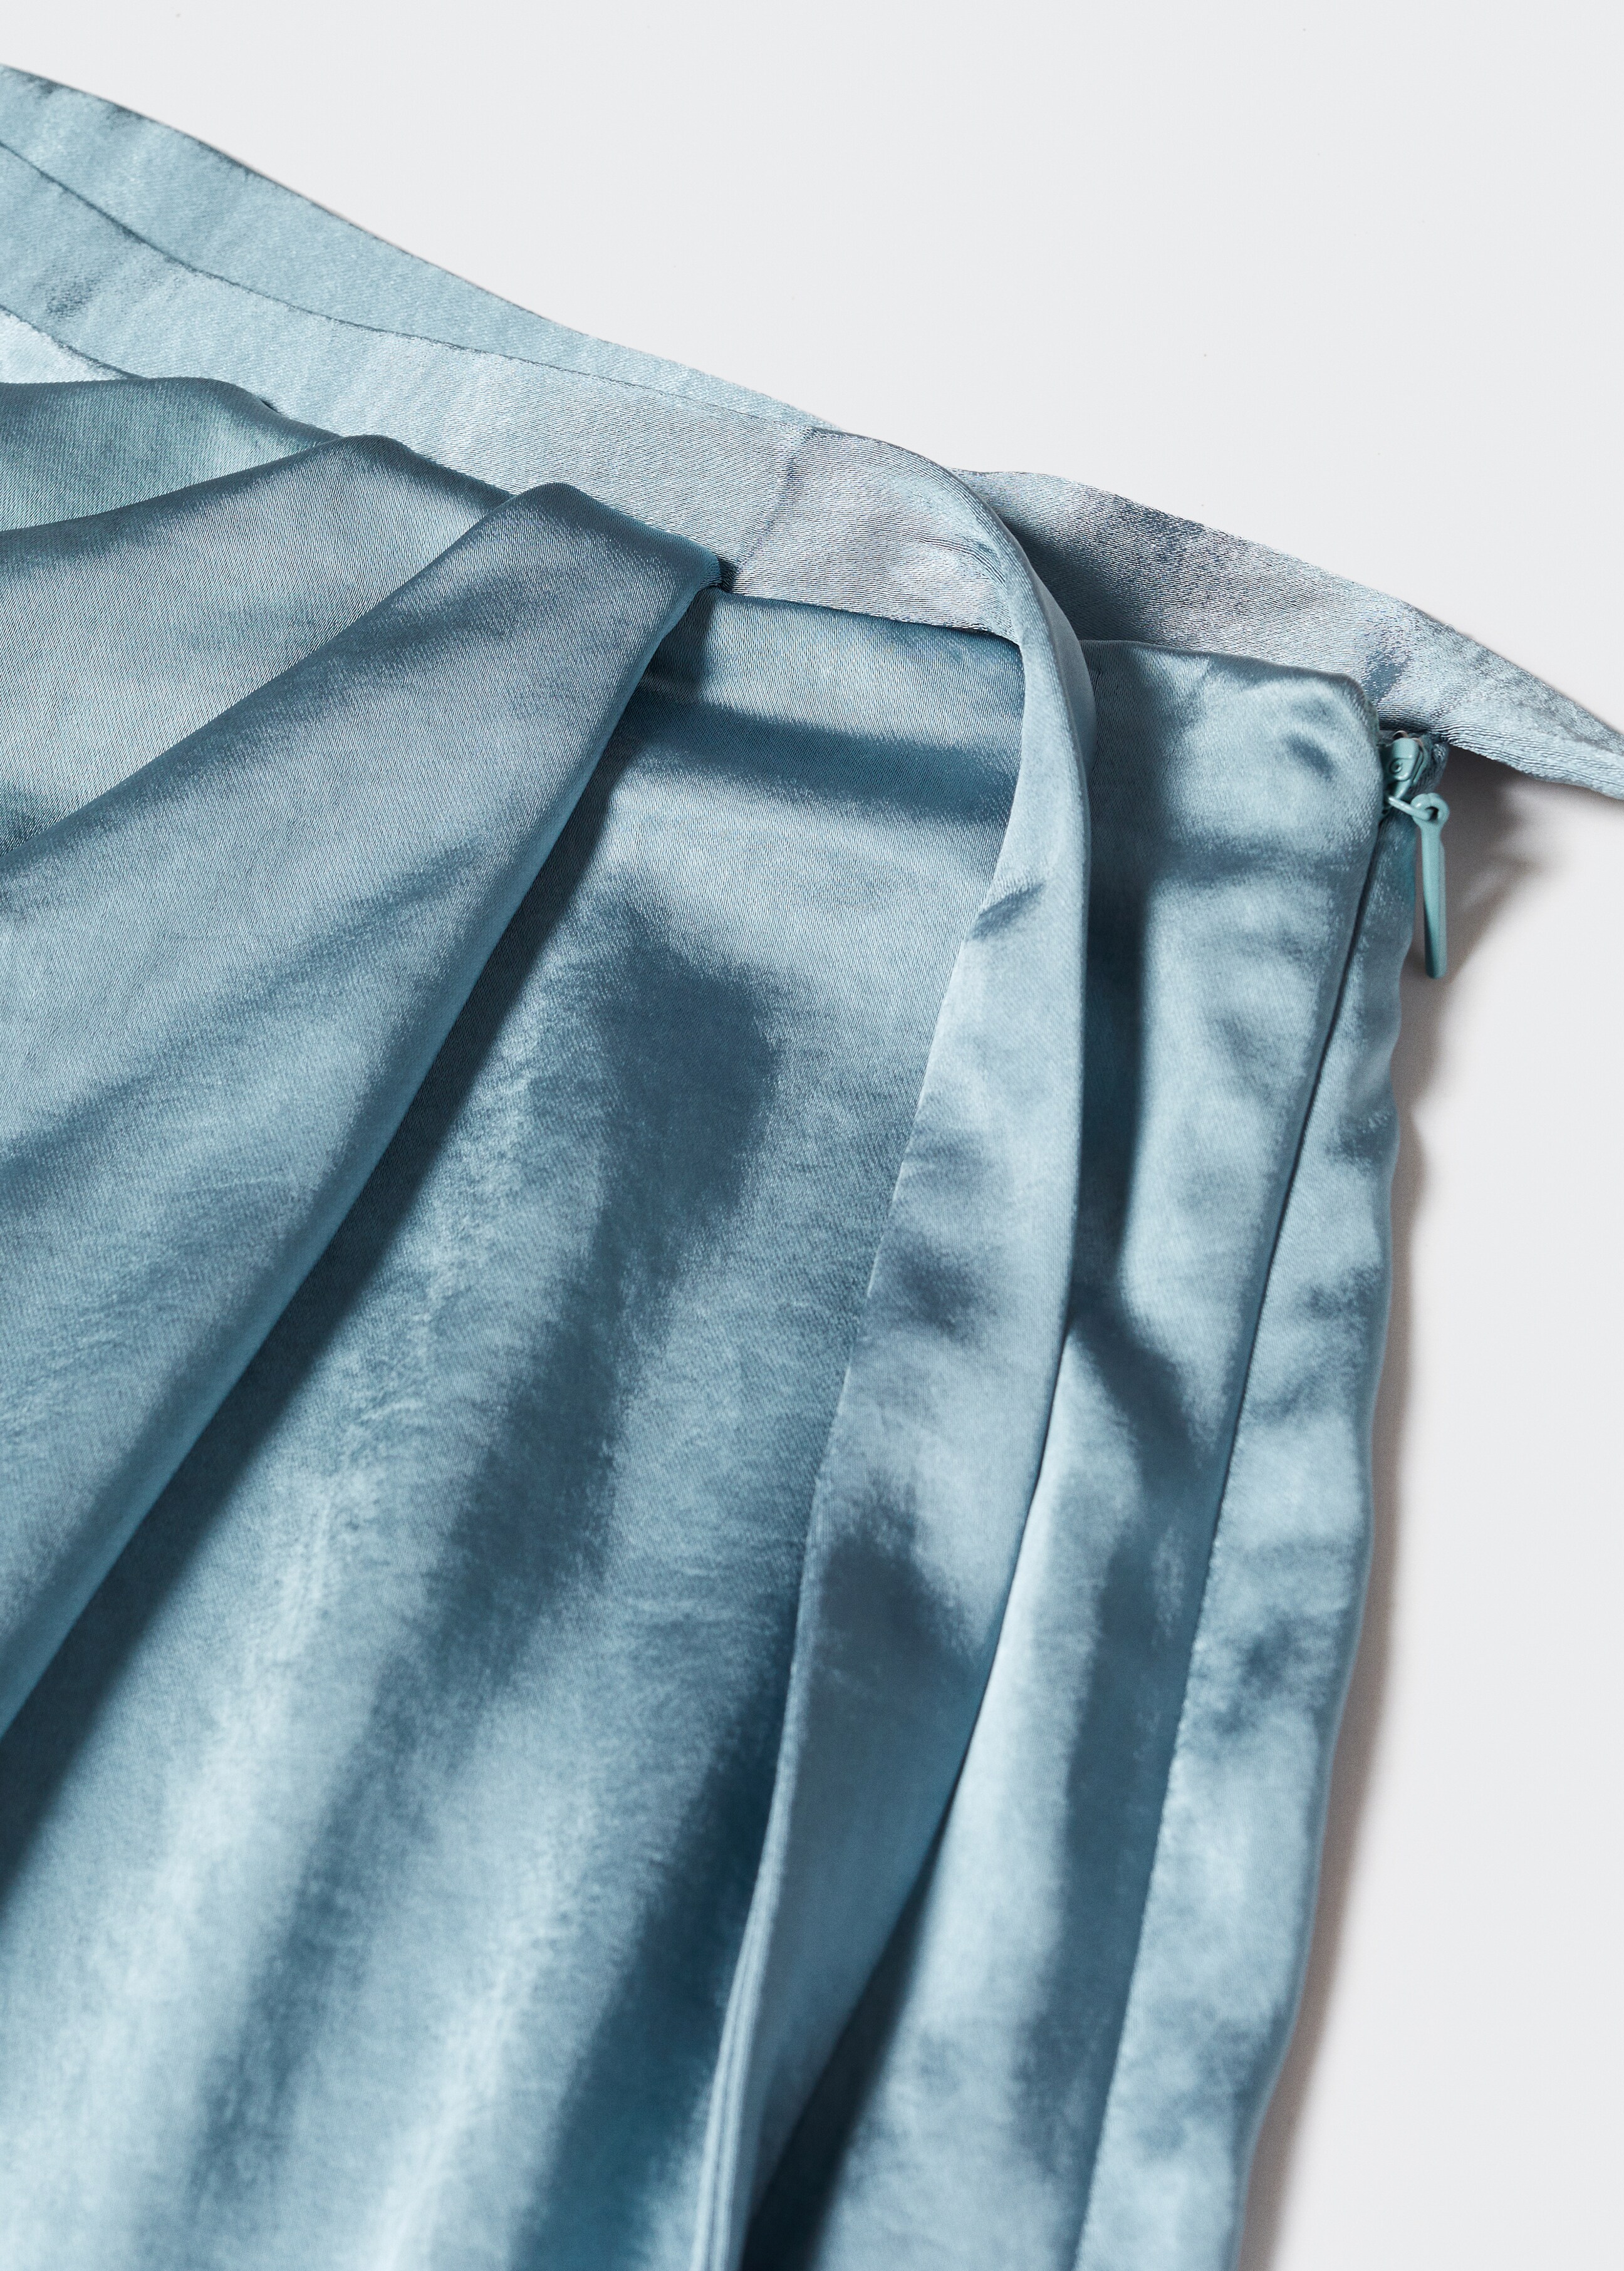 Satin wrap skirt - Details of the article 8